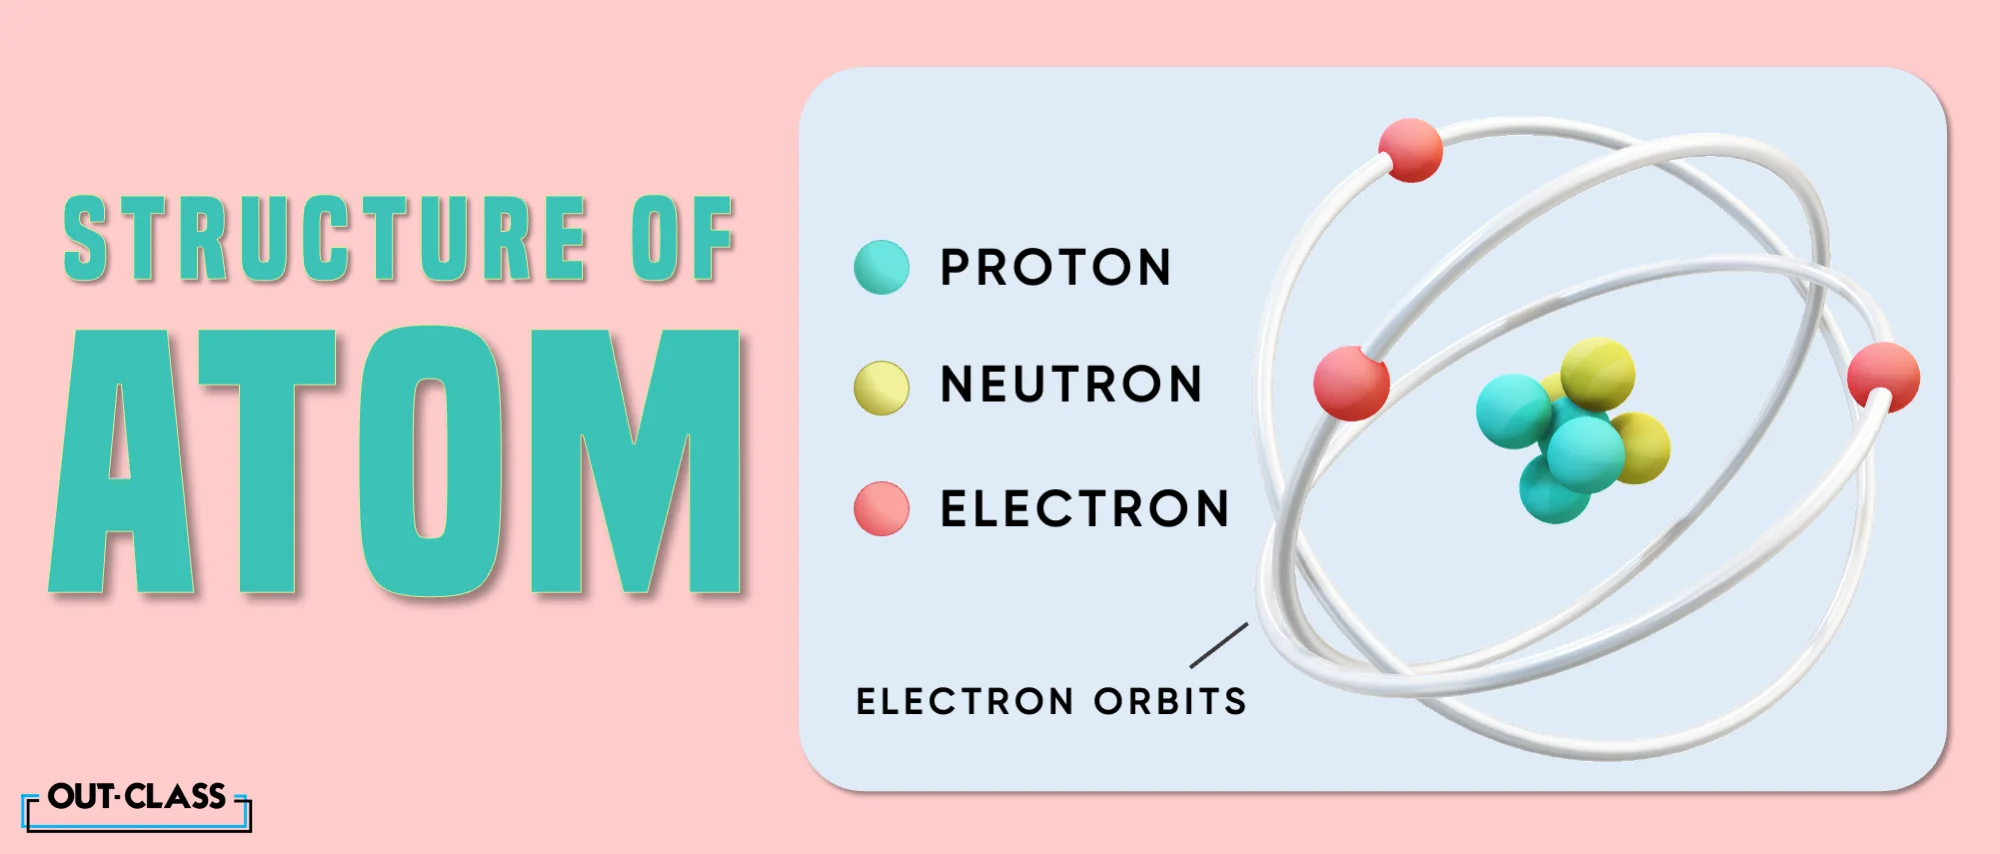 To explain in just one sentence: an atom is the smallest unit of matter, consisting of a nucleus at its centre, composed of protons and neutrons, surrounded by electrons orbiting in energy levels. Well, that's four things but one sentence.